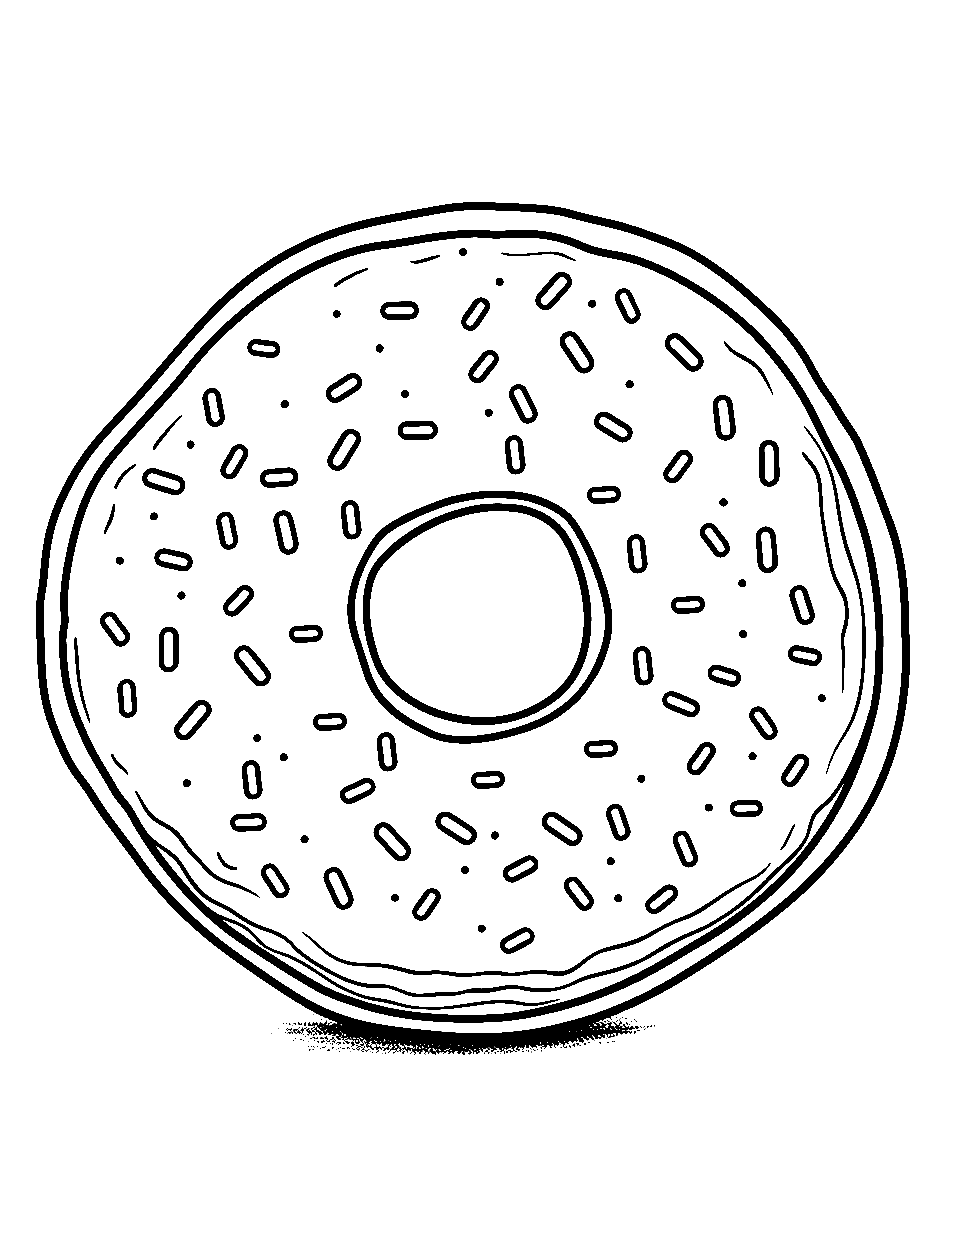 Simple Sprinkled Donut Coloring Page - A basic, easy-to-color donut with sprinkles.